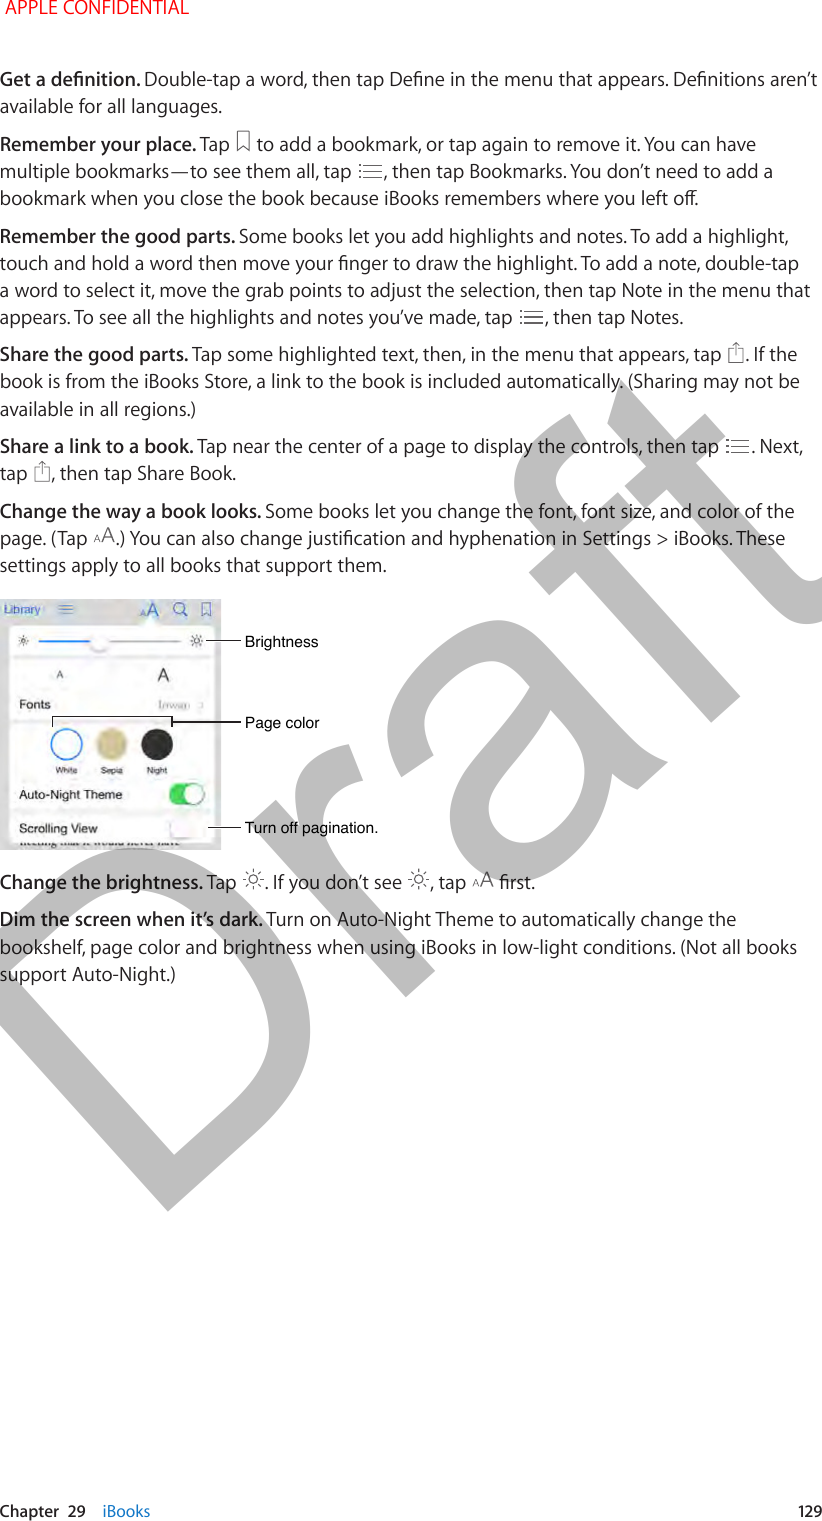   Chapter  29    iBooks  12 9Get a denition. Double-tap a word, then tap Dene in the menu that appears. Denitions aren’t available for all languages.Remember your place. Tap   to add a bookmark, or tap again to remove it. You can have multiple bookmarks—to see them all, tap  , then tap Bookmarks. You don’t need to add a bookmark when you close the book because iBooks remembers where you left o.Remember the good parts. Some books let you add highlights and notes. To add a highlight, touch and hold a word then move your nger to draw the highlight. To add a note, double-tap a word to select it, move the grab points to adjust the selection, then tap Note in the menu that appears. To see all the highlights and notes you’ve made, tap  , then tap Notes.Share the good parts. Tap some highlighted text, then, in the menu that appears, tap  . If the book is from the iBooks Store, a link to the book is included automatically. (Sharing may not be available in all regions.)Share a link to a book. Tap near the center of a page to display the controls, then tap  . Next, tap  , then tap Share Book.Change the way a book looks. Some books let you change the font, font size, and color of the page. (Tap  .) You can also change justication and hyphenation in Settings &gt; iBooks. These settings apply to all books that support them.Page colorPage colorBrightnessBrightnessTurn off pagination.Turn off pagination.Change the brightness. Tap  . If you don’t see  , tap   rst.Dim the screen when it’s dark. Turn on Auto-Night Theme to automatically change the bookshelf, page color and brightness when using iBooks in low-light conditions. (Not all books support Auto-Night.) APPLE CONFIDENTIALDraft